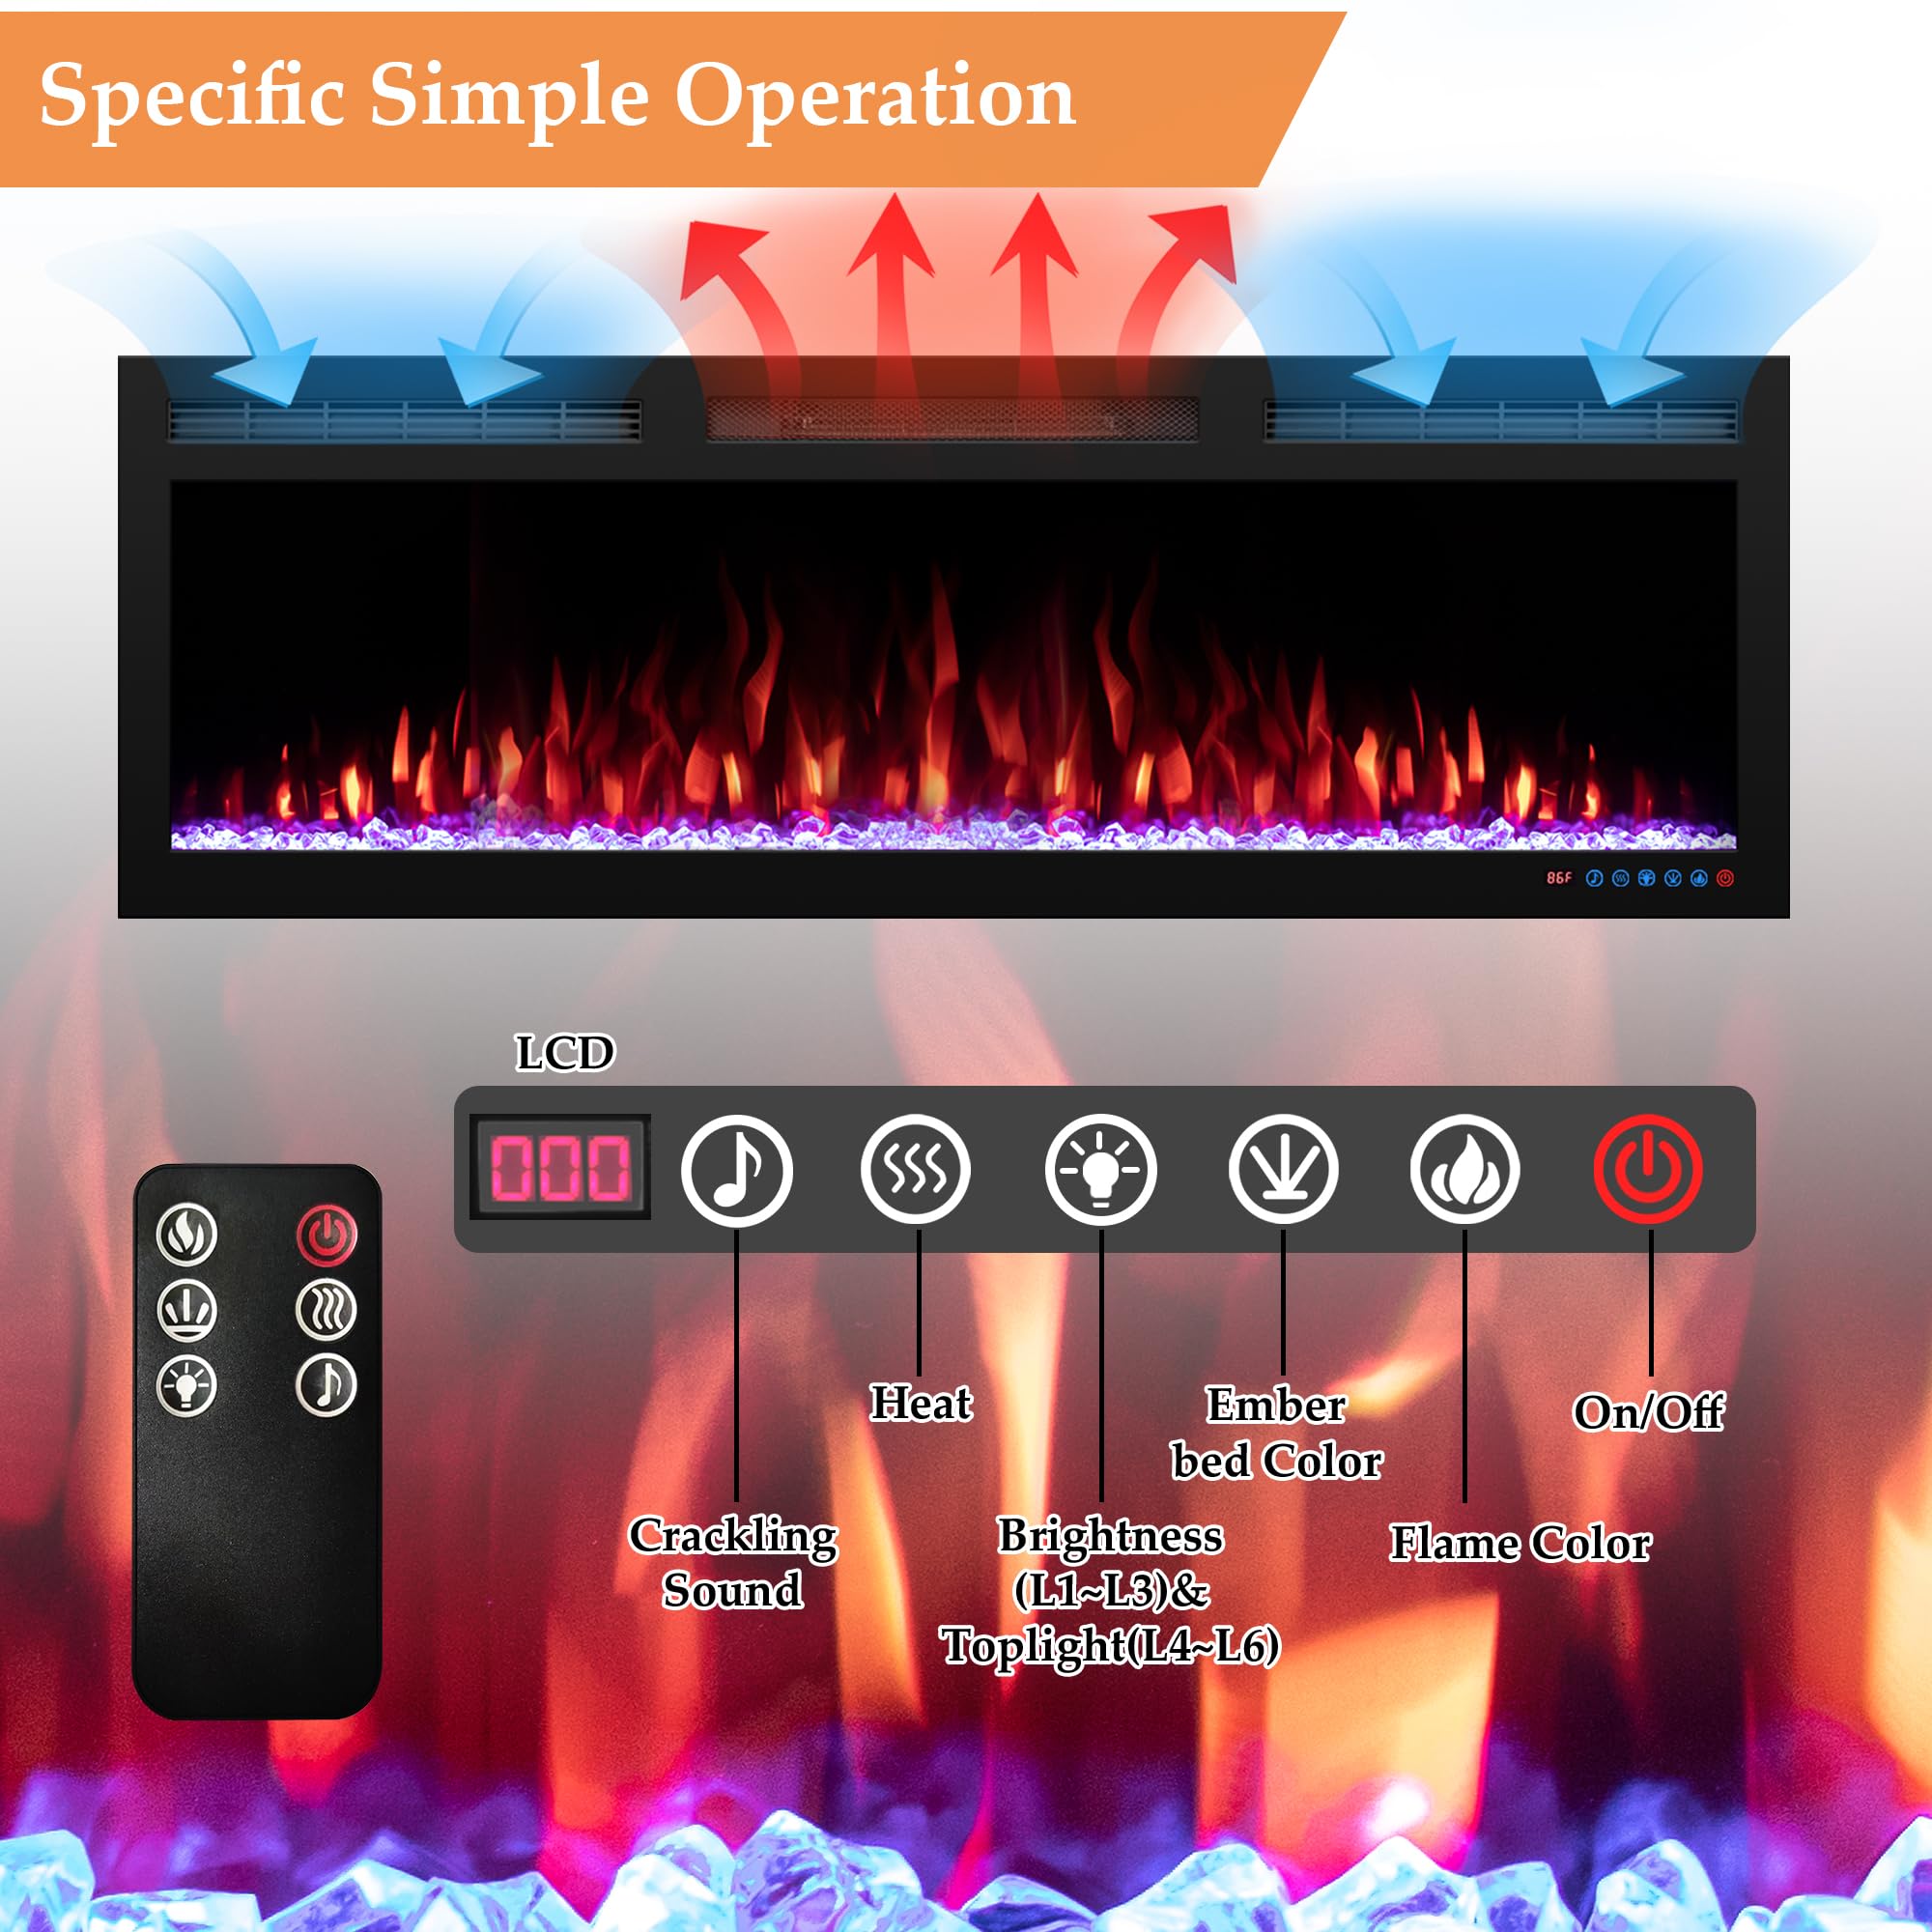 Dreamflame 95" WiFi-Enabled Electric Fireplace, Smart Control via Alexa or App, Recessed & Wall Mounted Fireplace Heater with Thermostat, Slim Frame, Multi-Color Combinations, Black